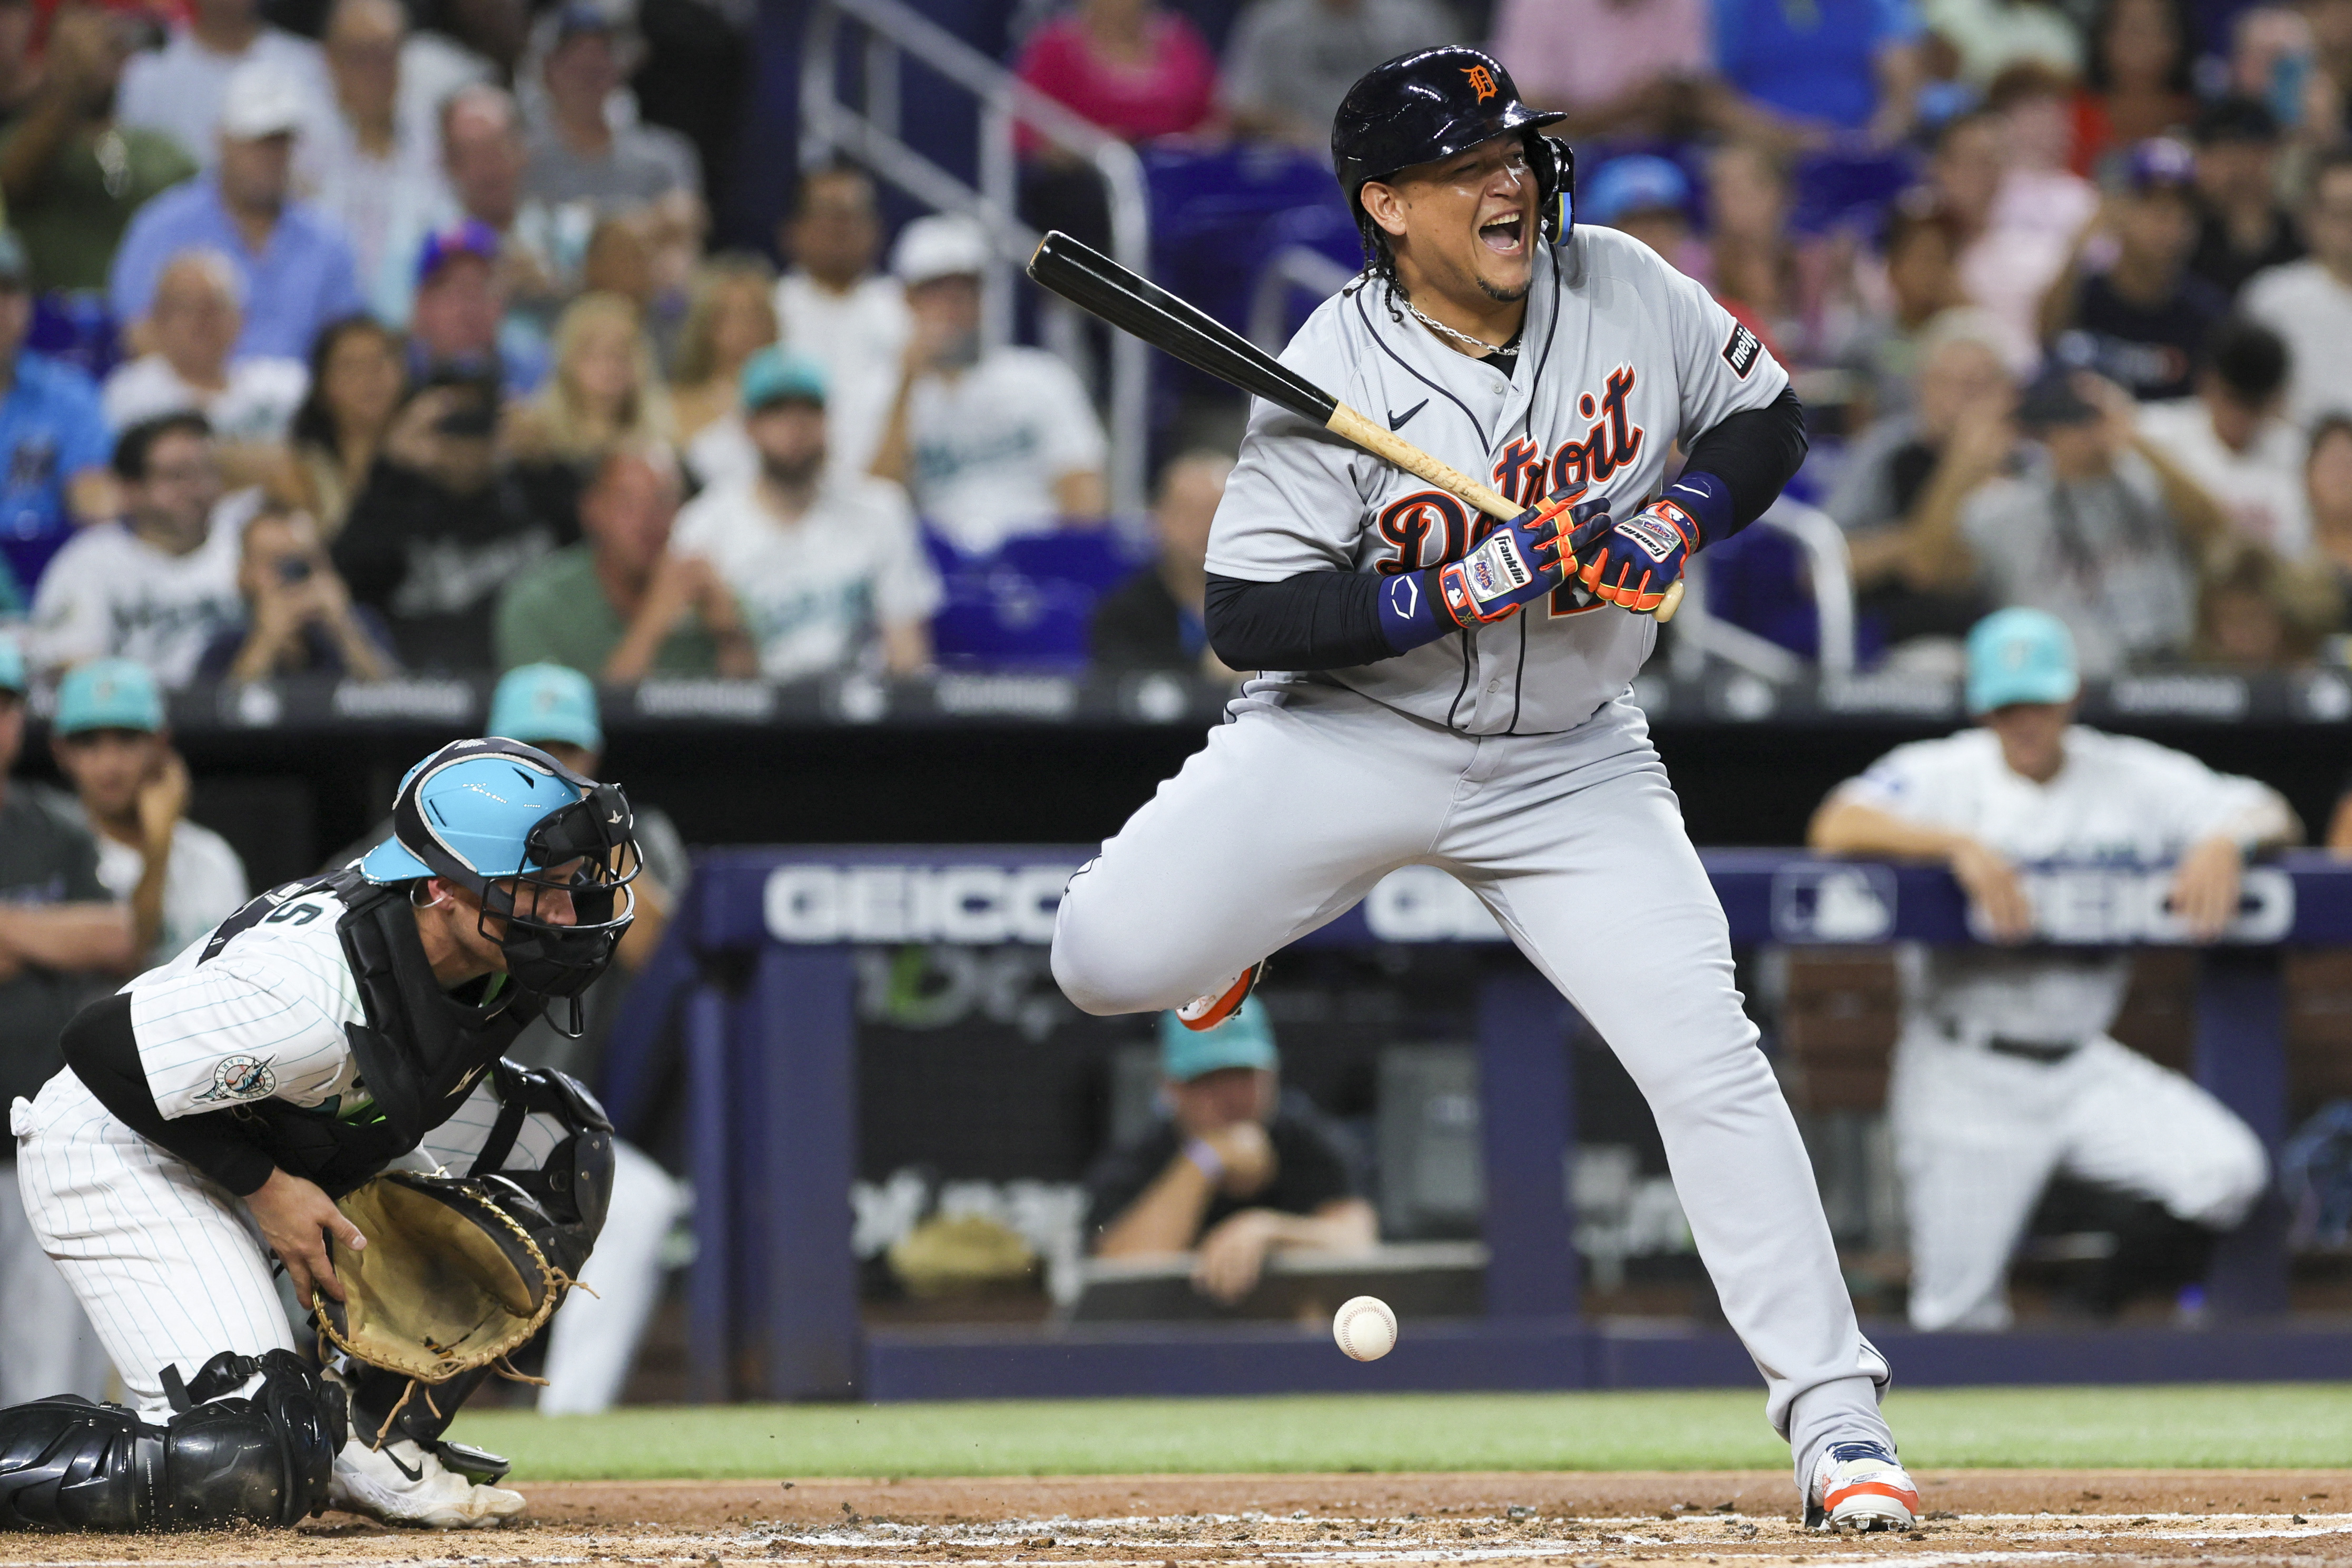 Marlins break late tie, hold off Tigers